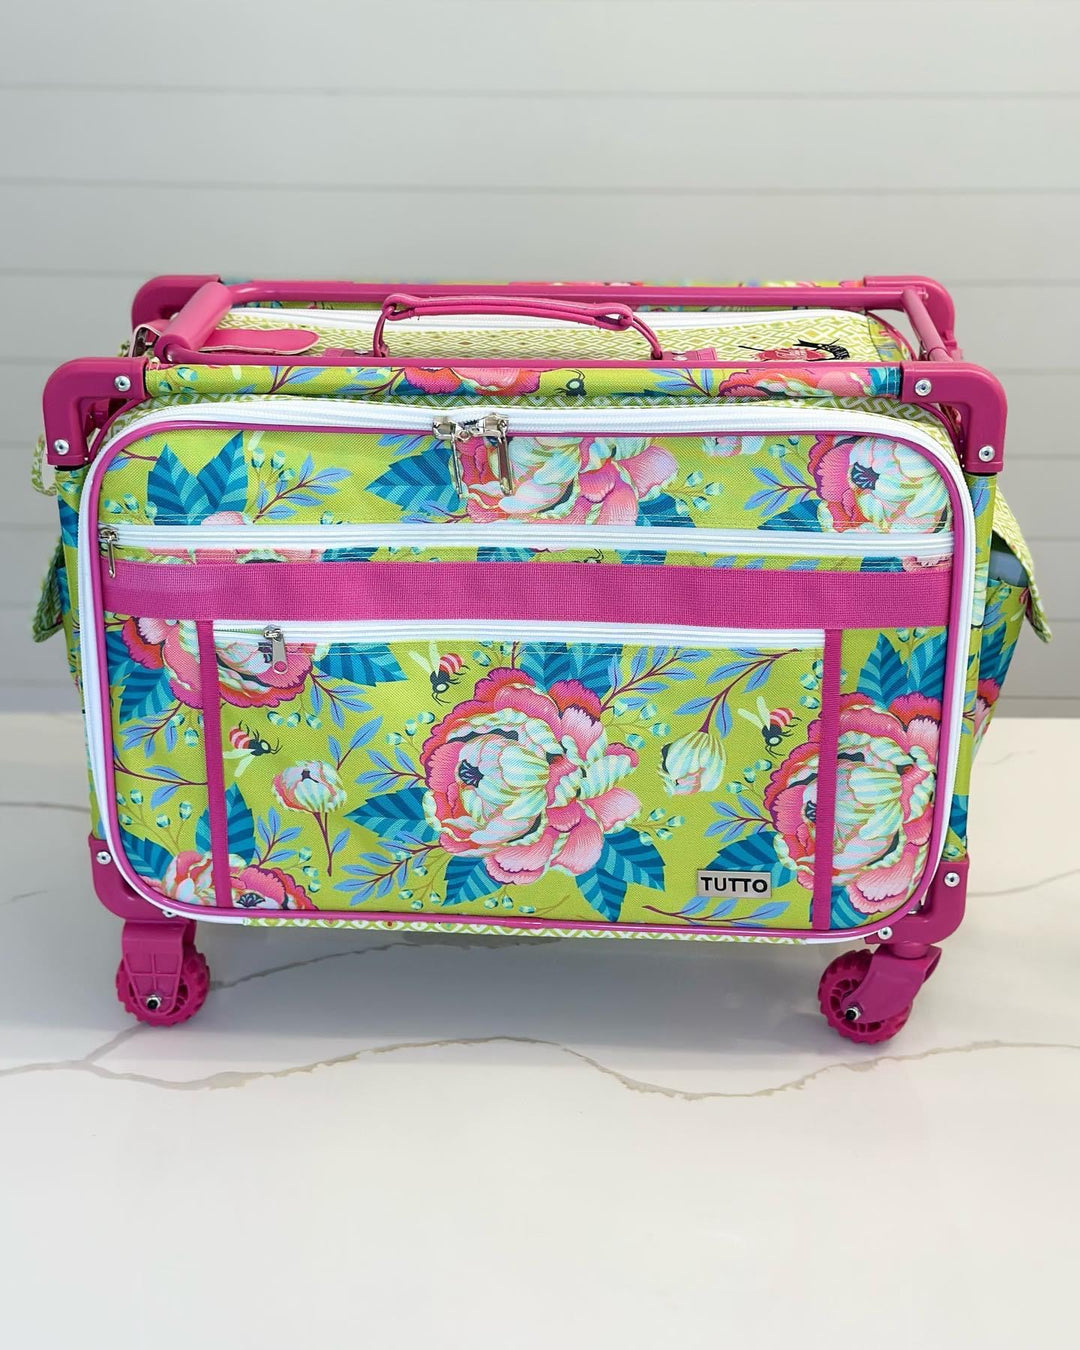 REVIEW: Tutto Sewing Machine Case 